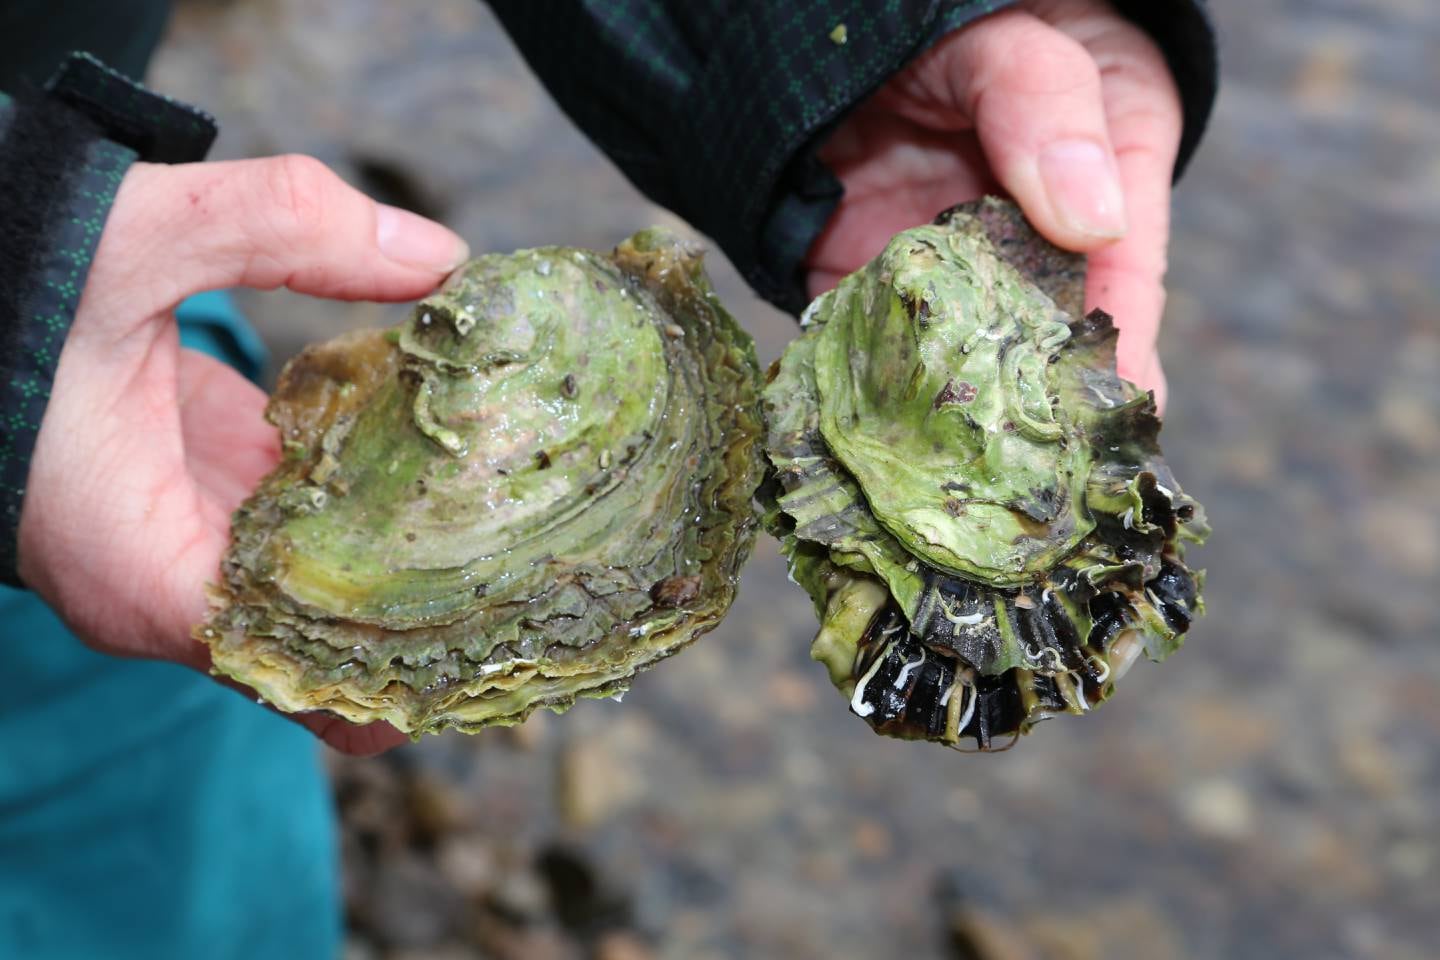 Pacific oysters have become a serious problem in Norway since they were first found here in 2006.